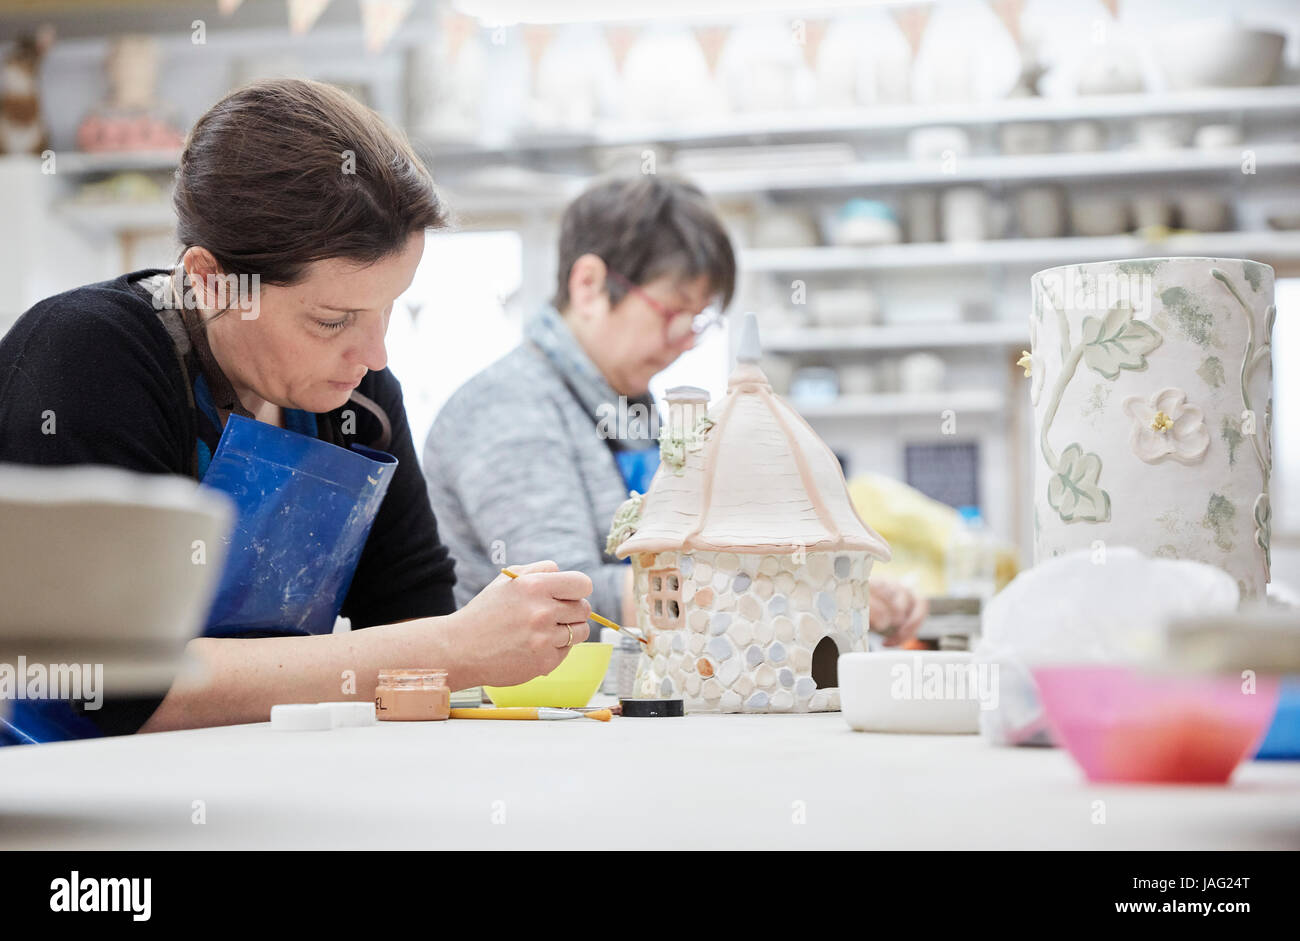 Two women seated at a workbench in a pottery studio, working on decorated clay objects. Stock Photo